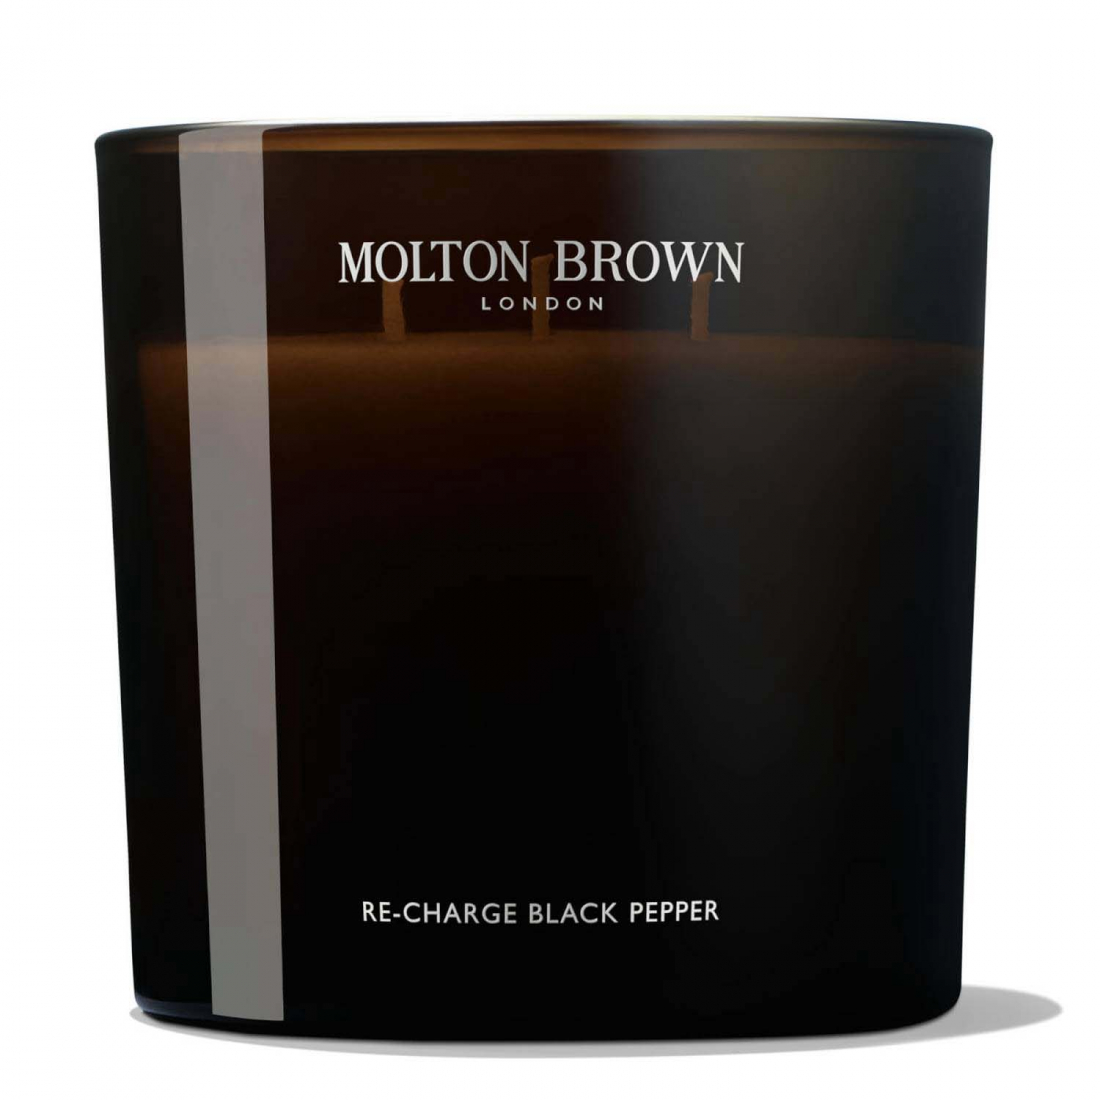 'Re-charge Black Pepper' 3 Wicks Candle - 600 g